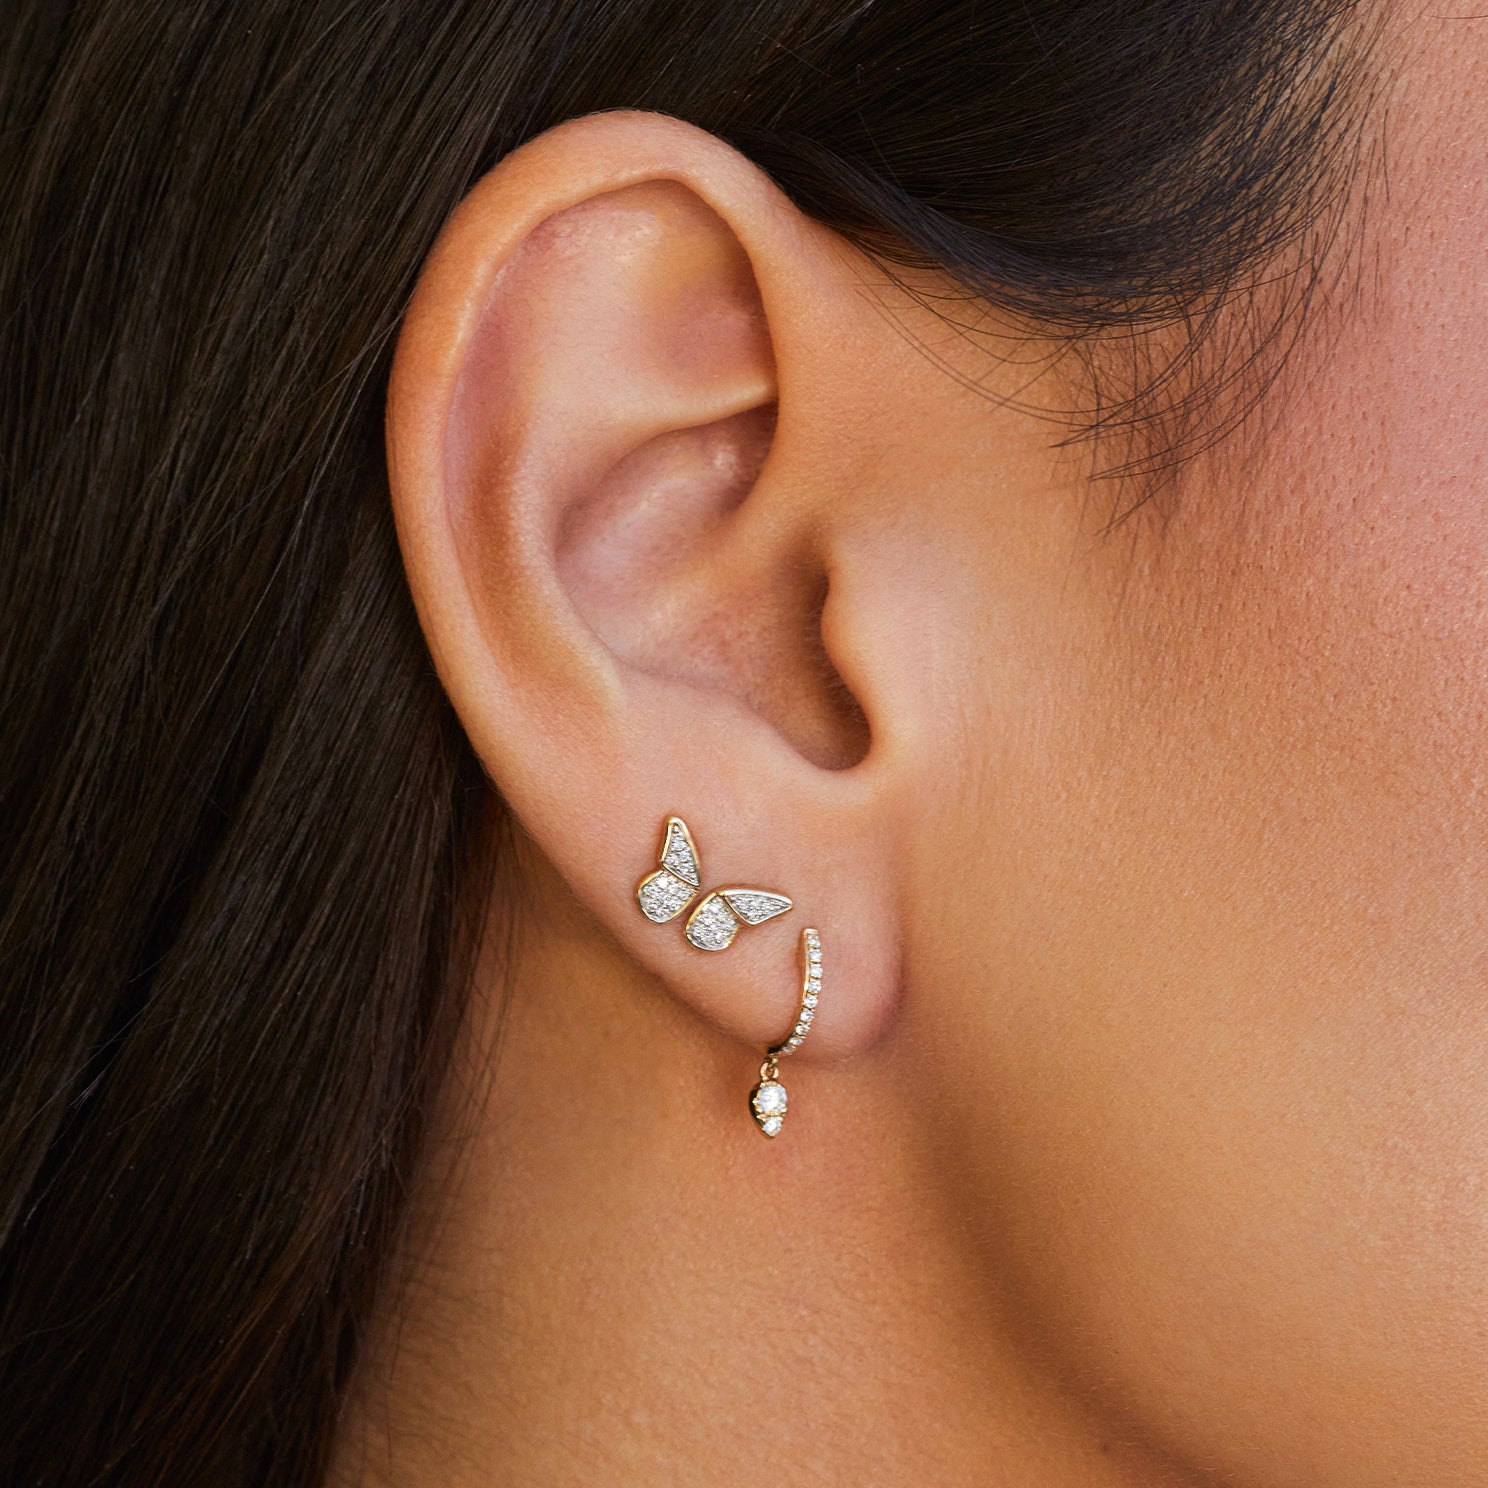 Diamond Flutter Stud Earrings in 14k yellow gold styled on second and third earring hole next to diamond huggie with teardrop on ear of model